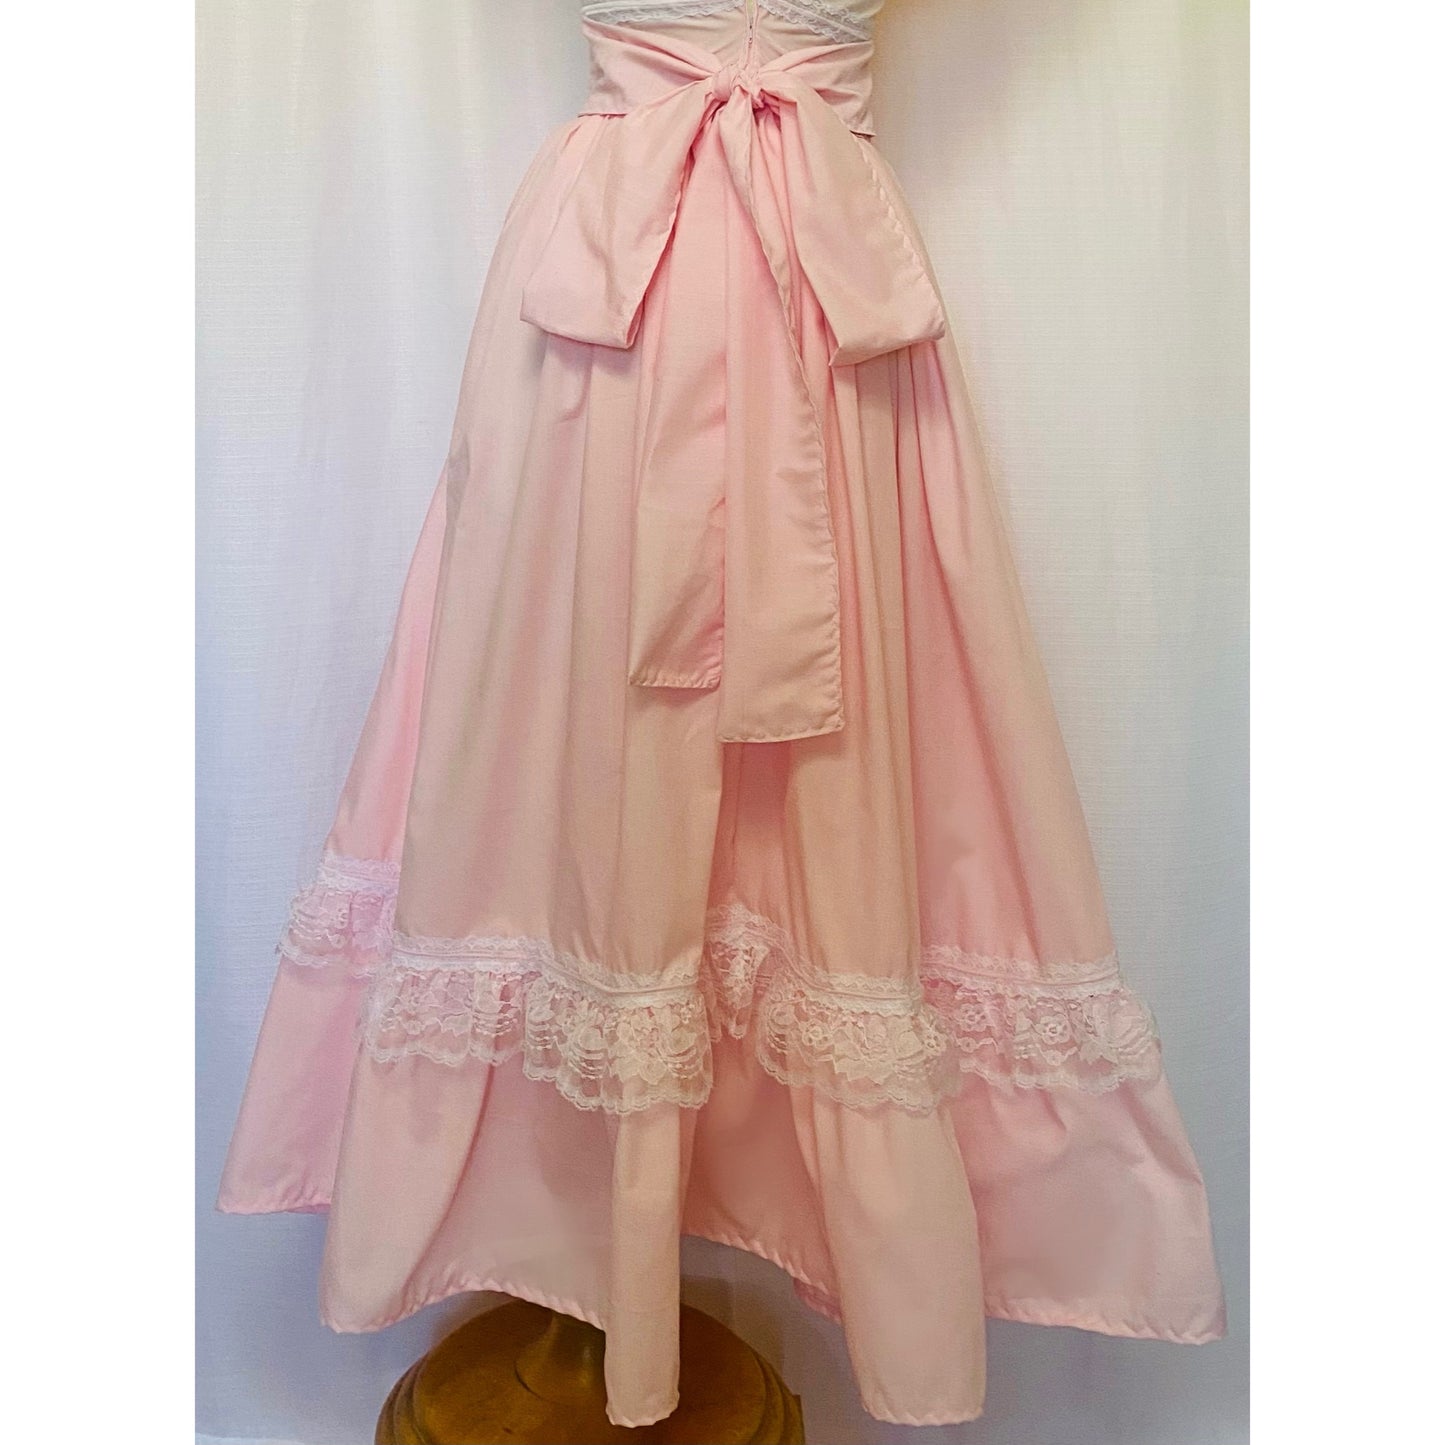 The Detelina Dress in Pink